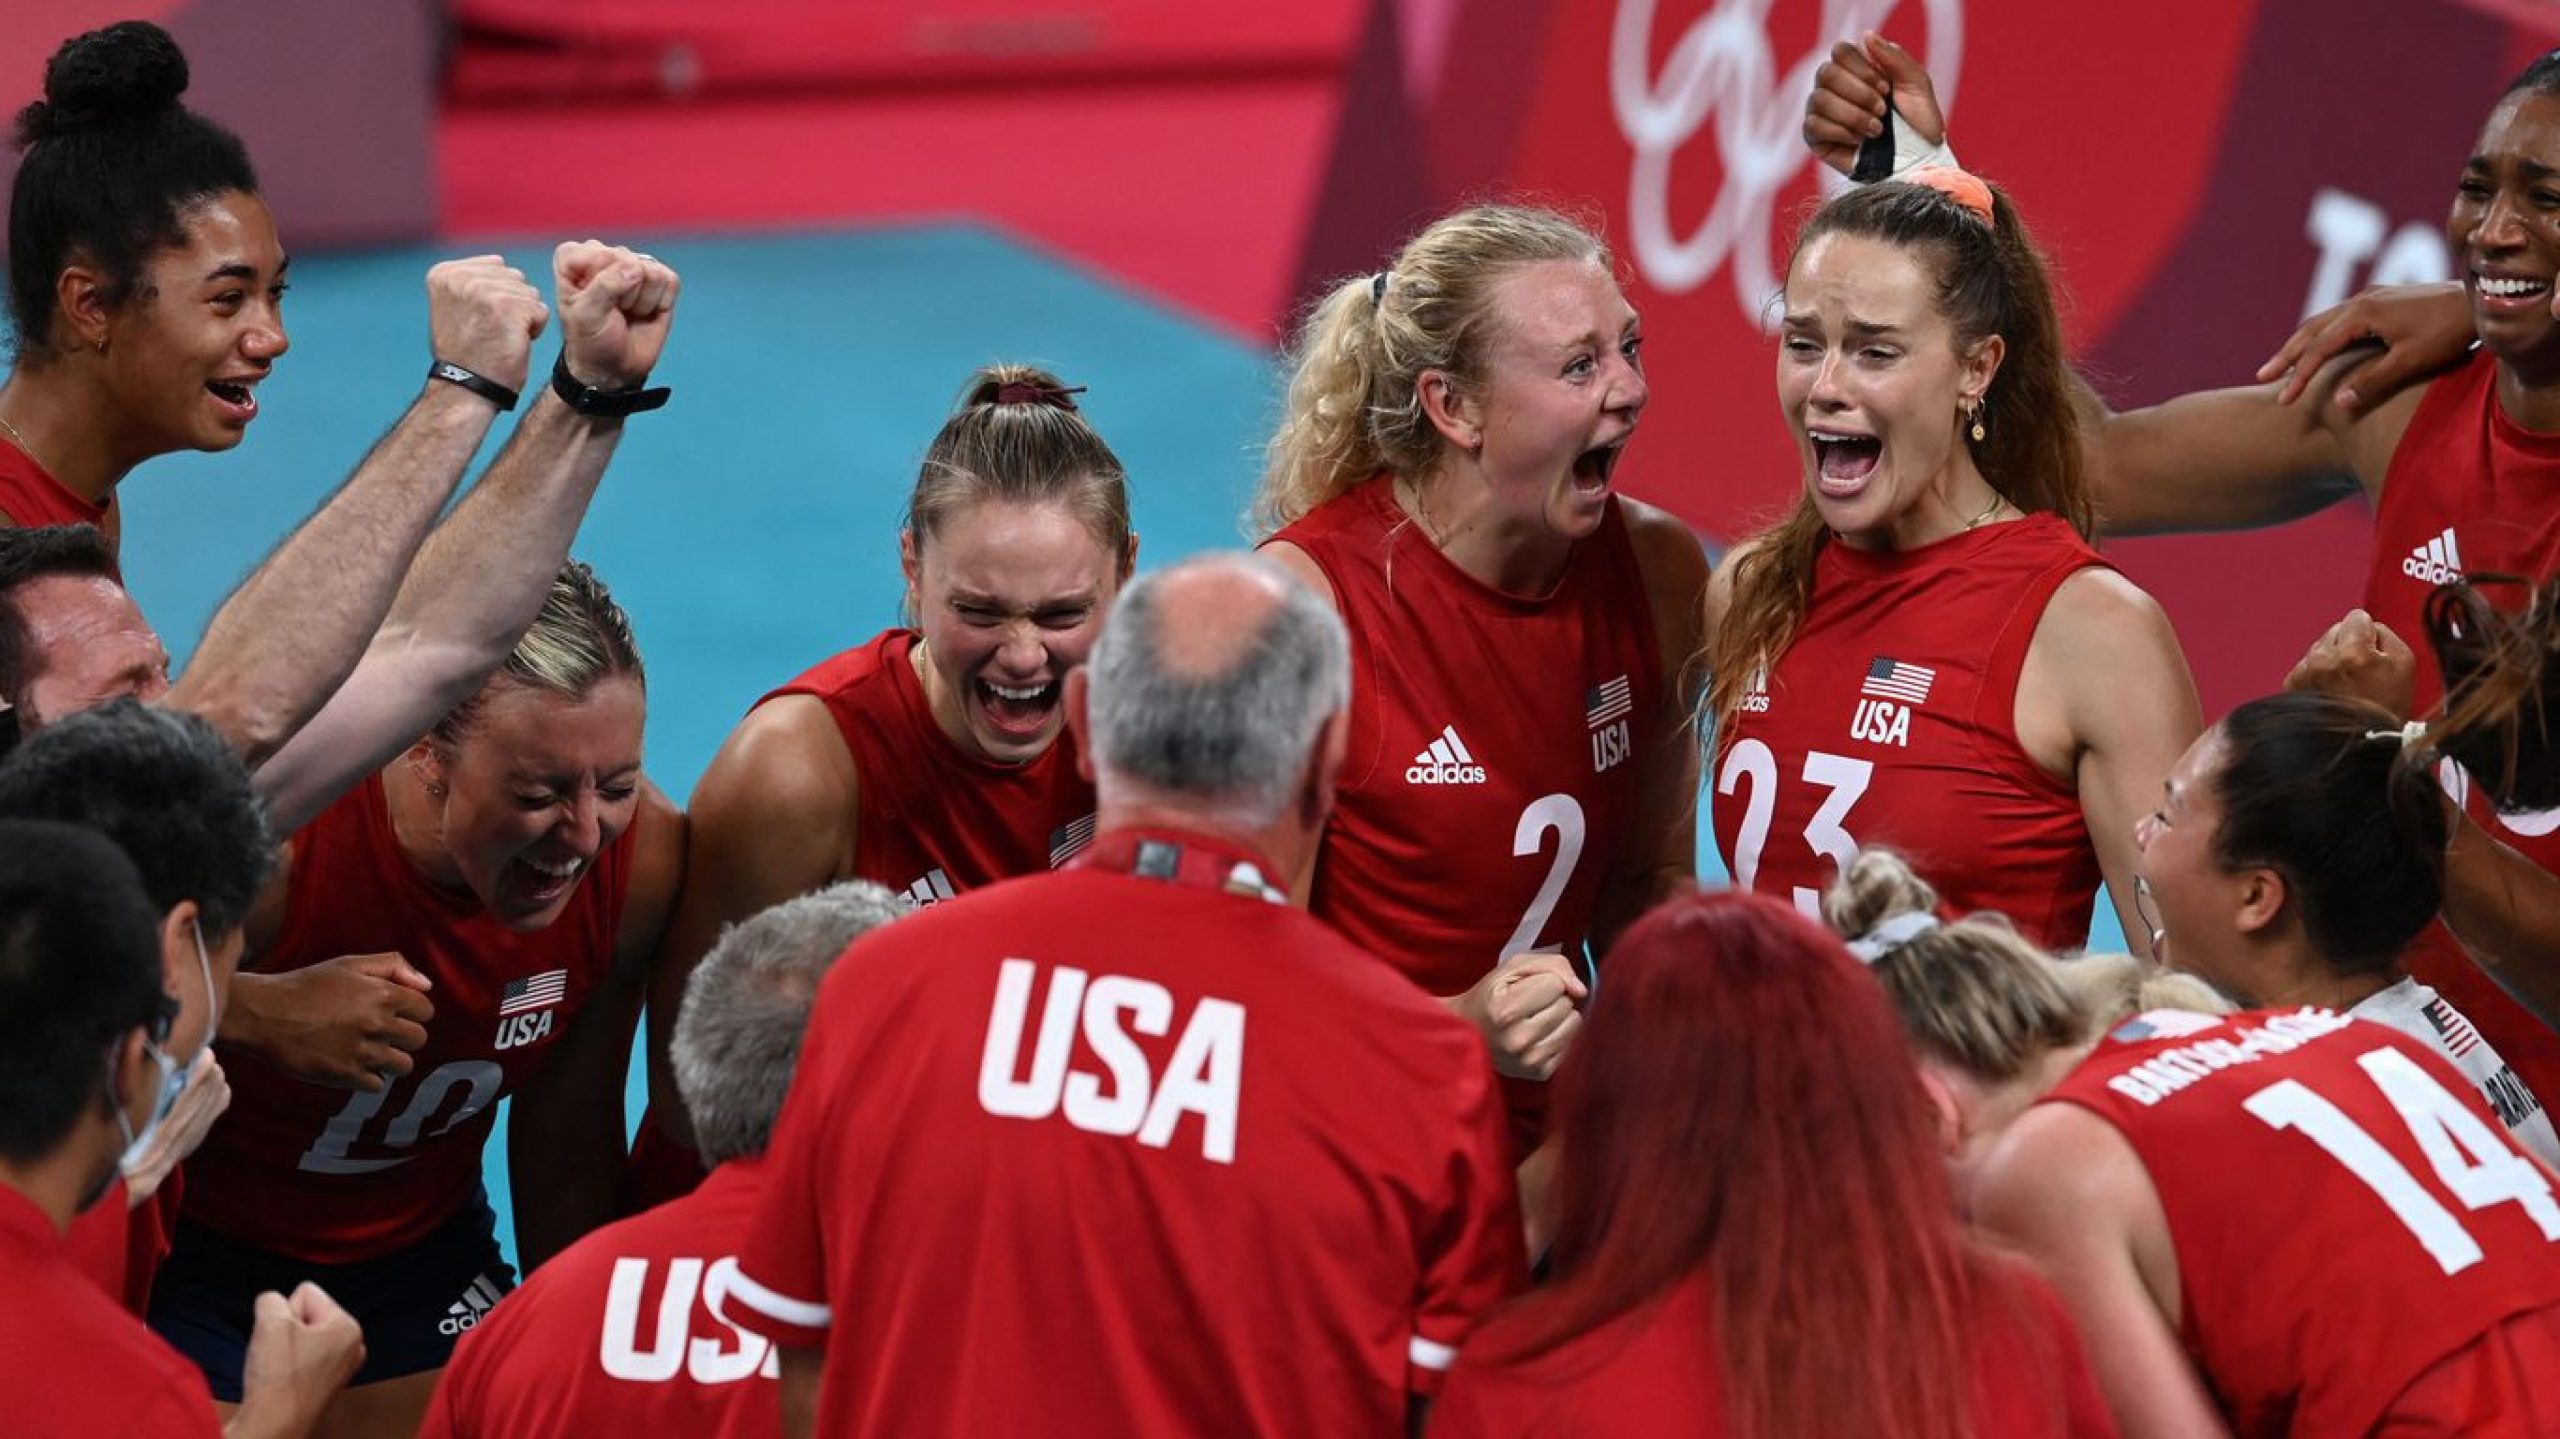 U.S. edges China for most gold medals after women’s indoor volleyball team win